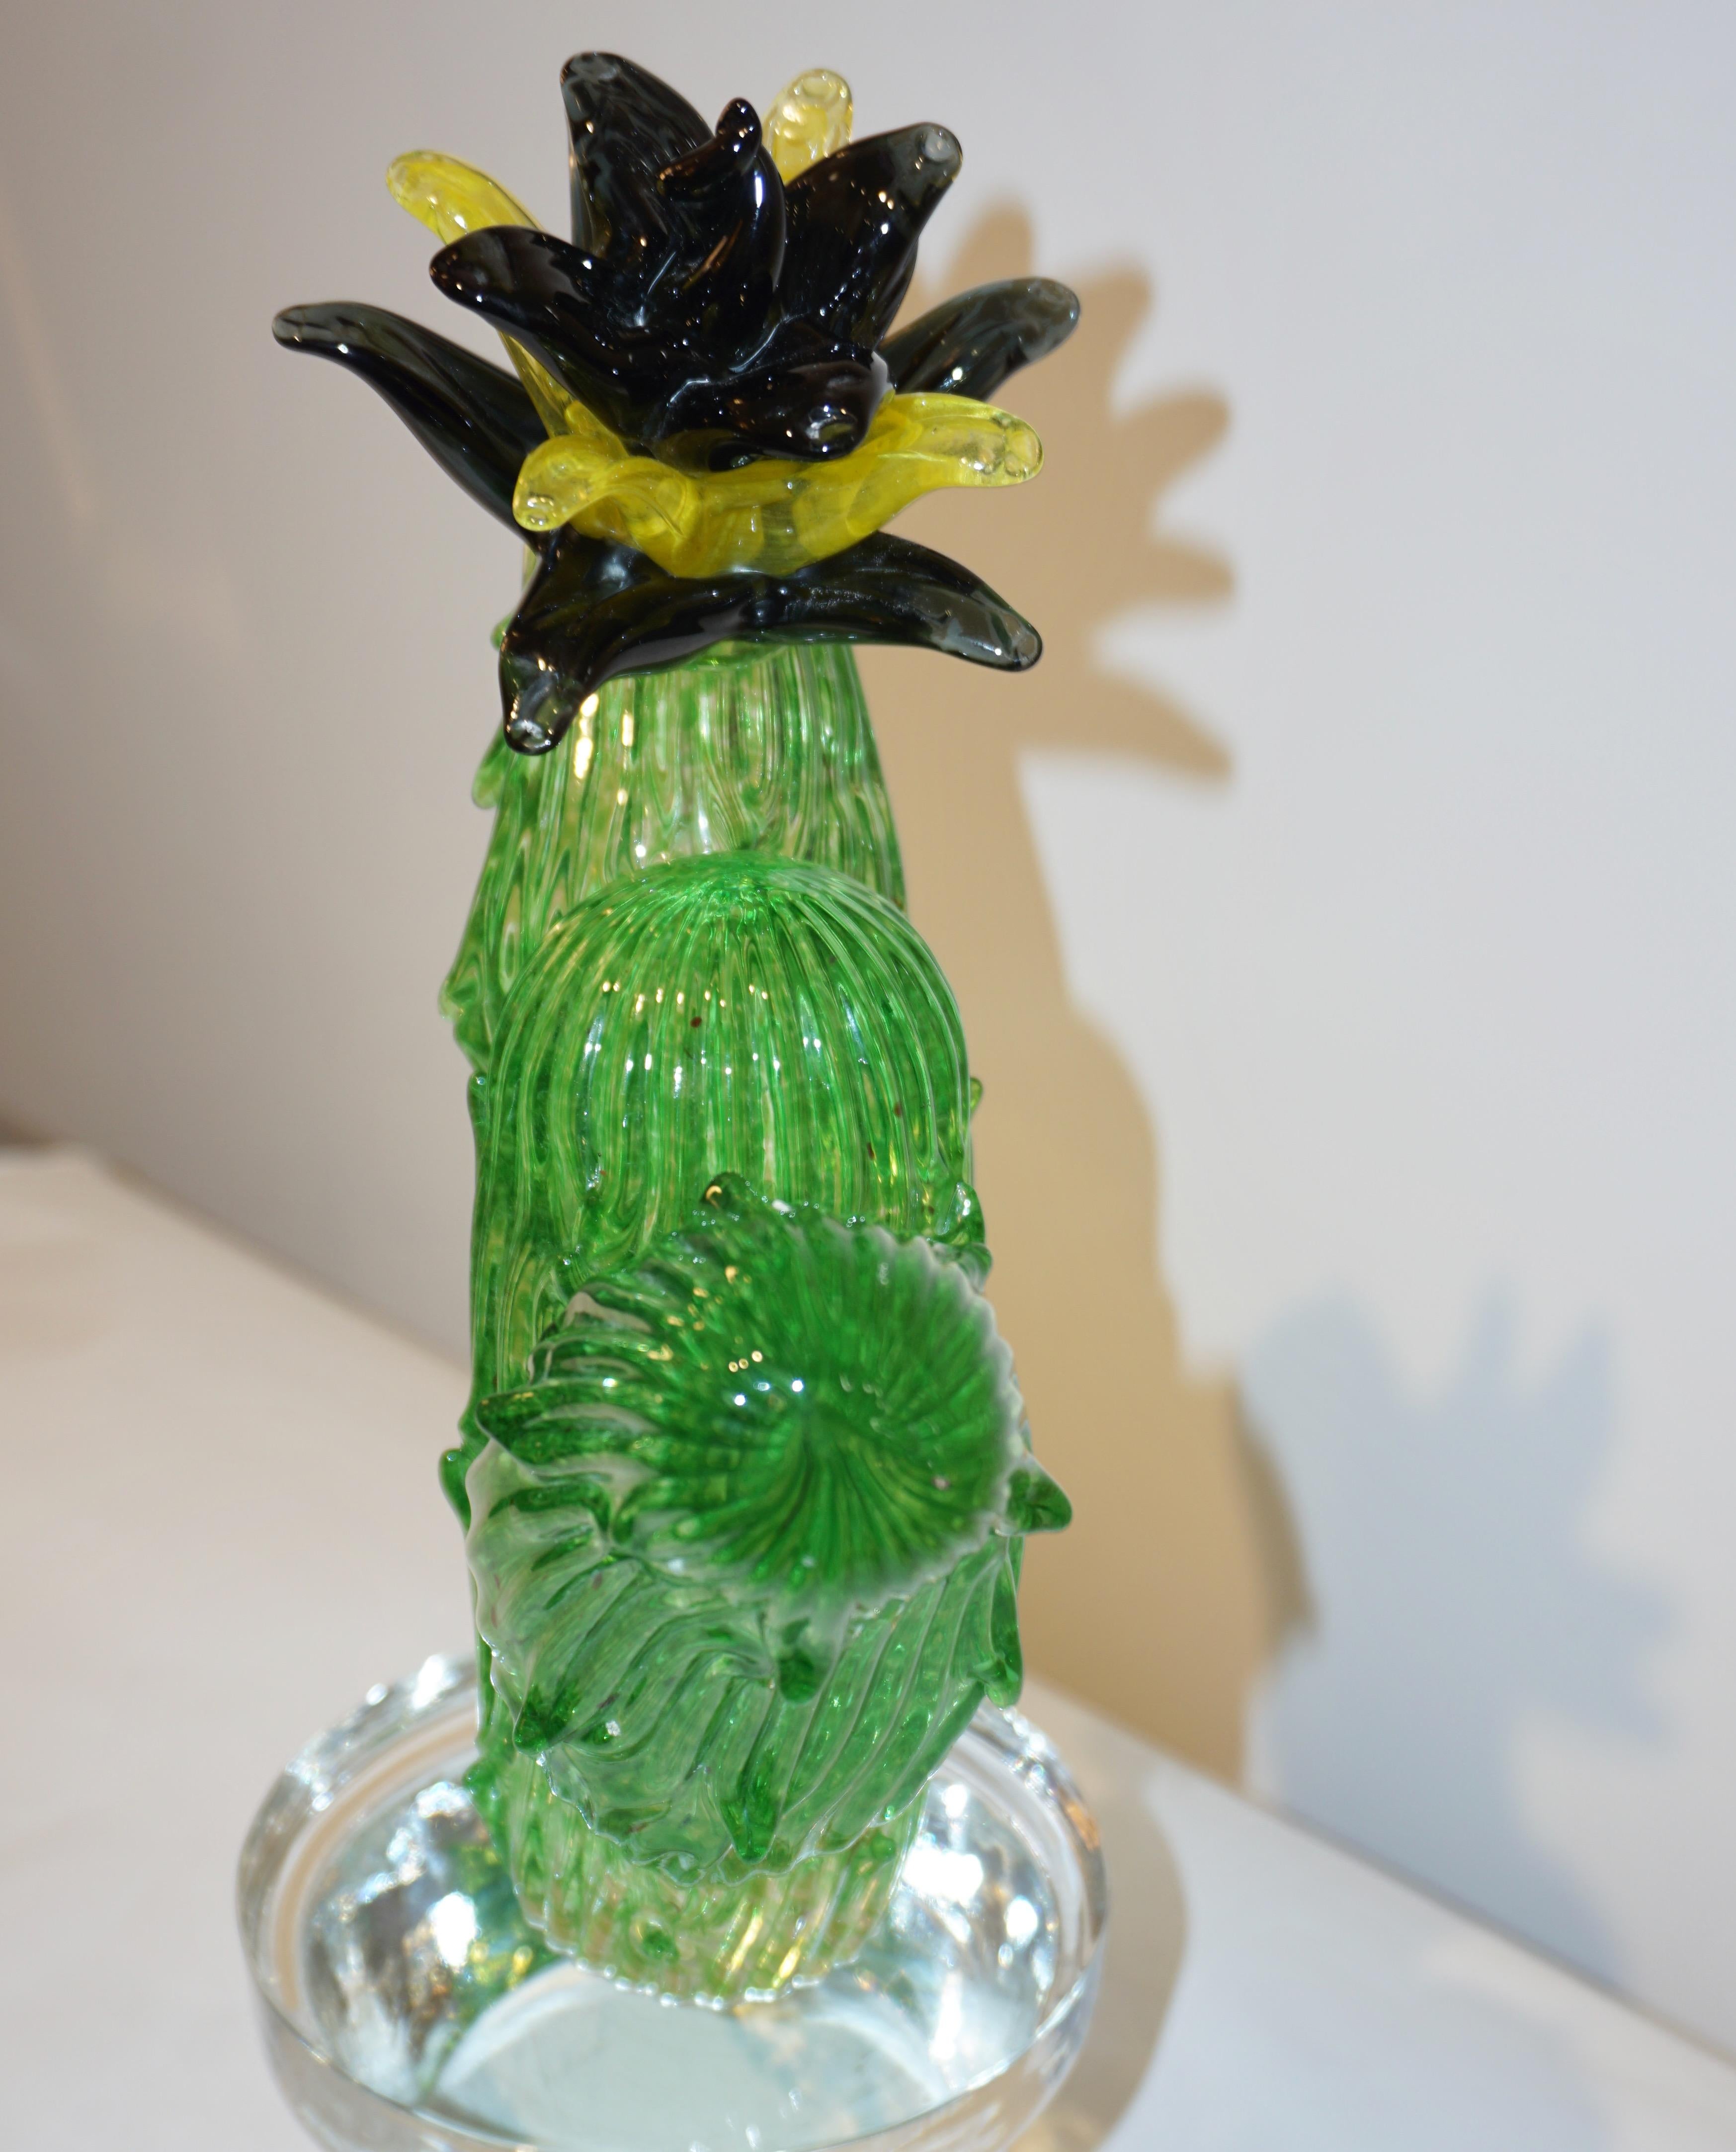 Hand-Crafted Formia Marta Marzotto Vintage Murano Glass Black Flower Cactus